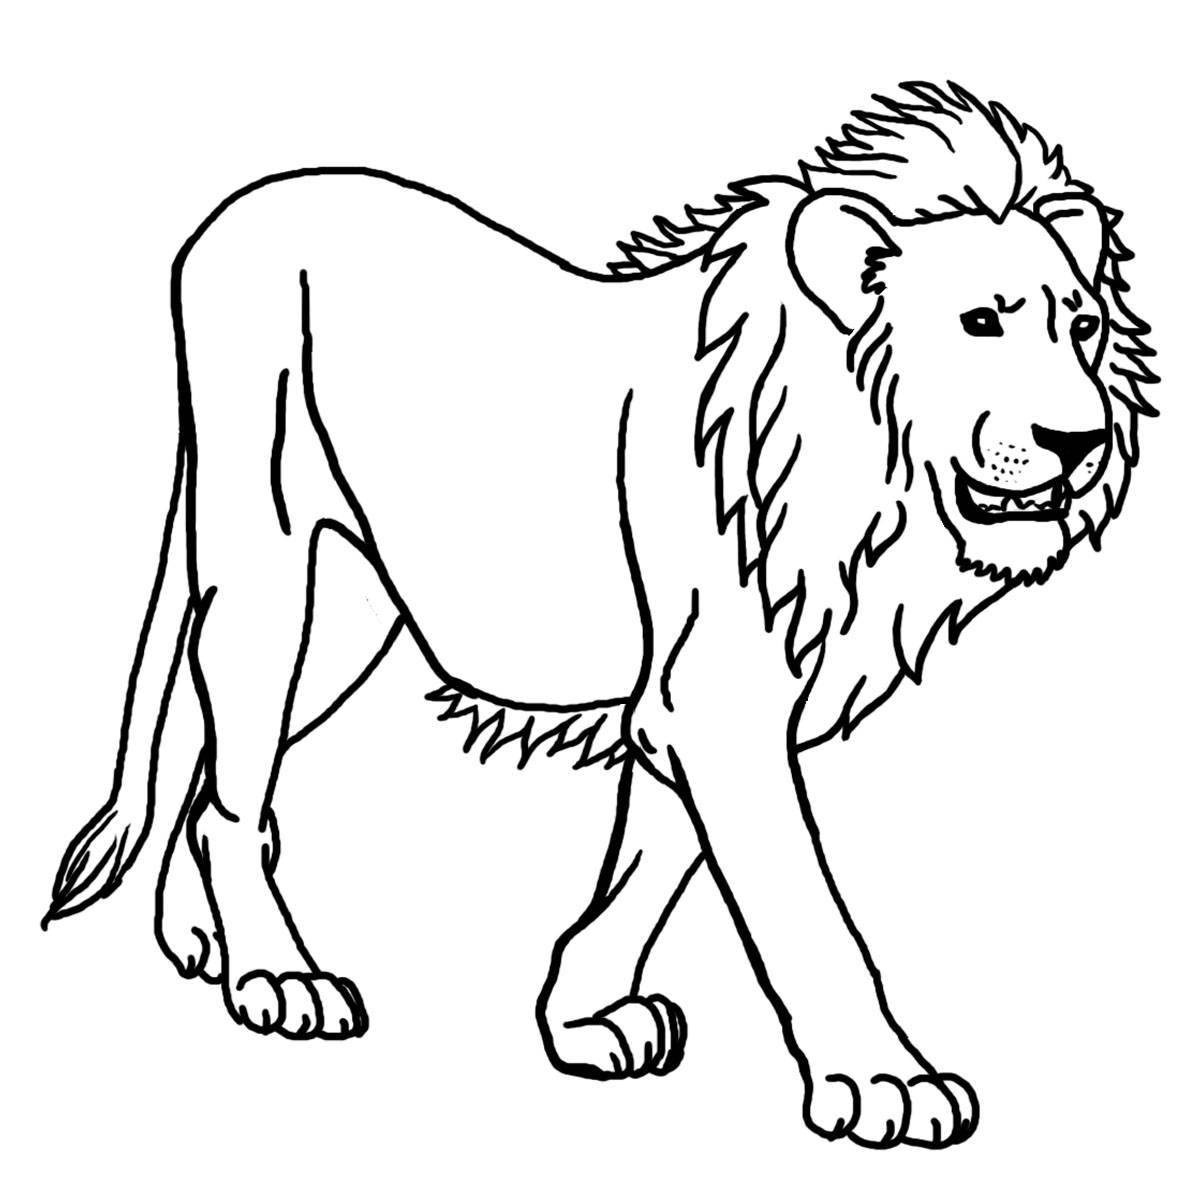 Colorful lion coloring page for 3-4 year olds